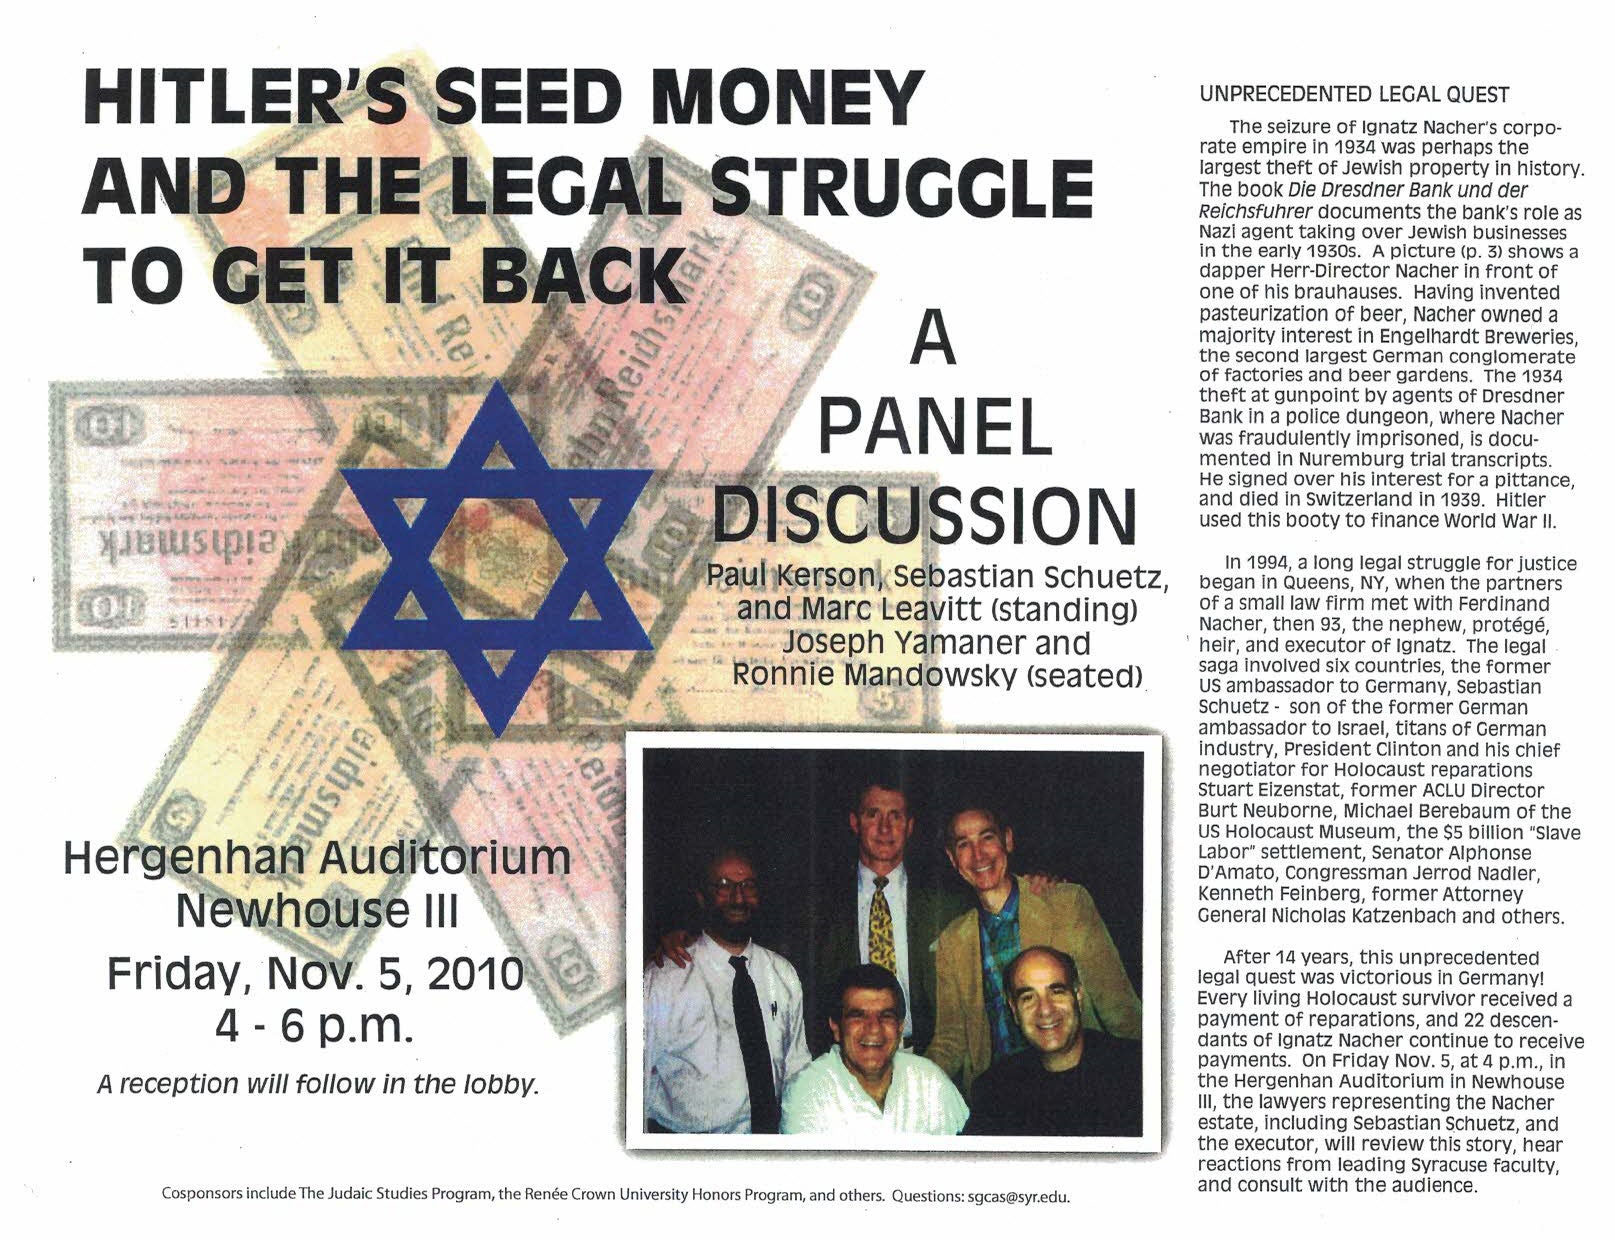 Hitler Seed Money article Joseph N. Yamaner and Associates in Queens NY